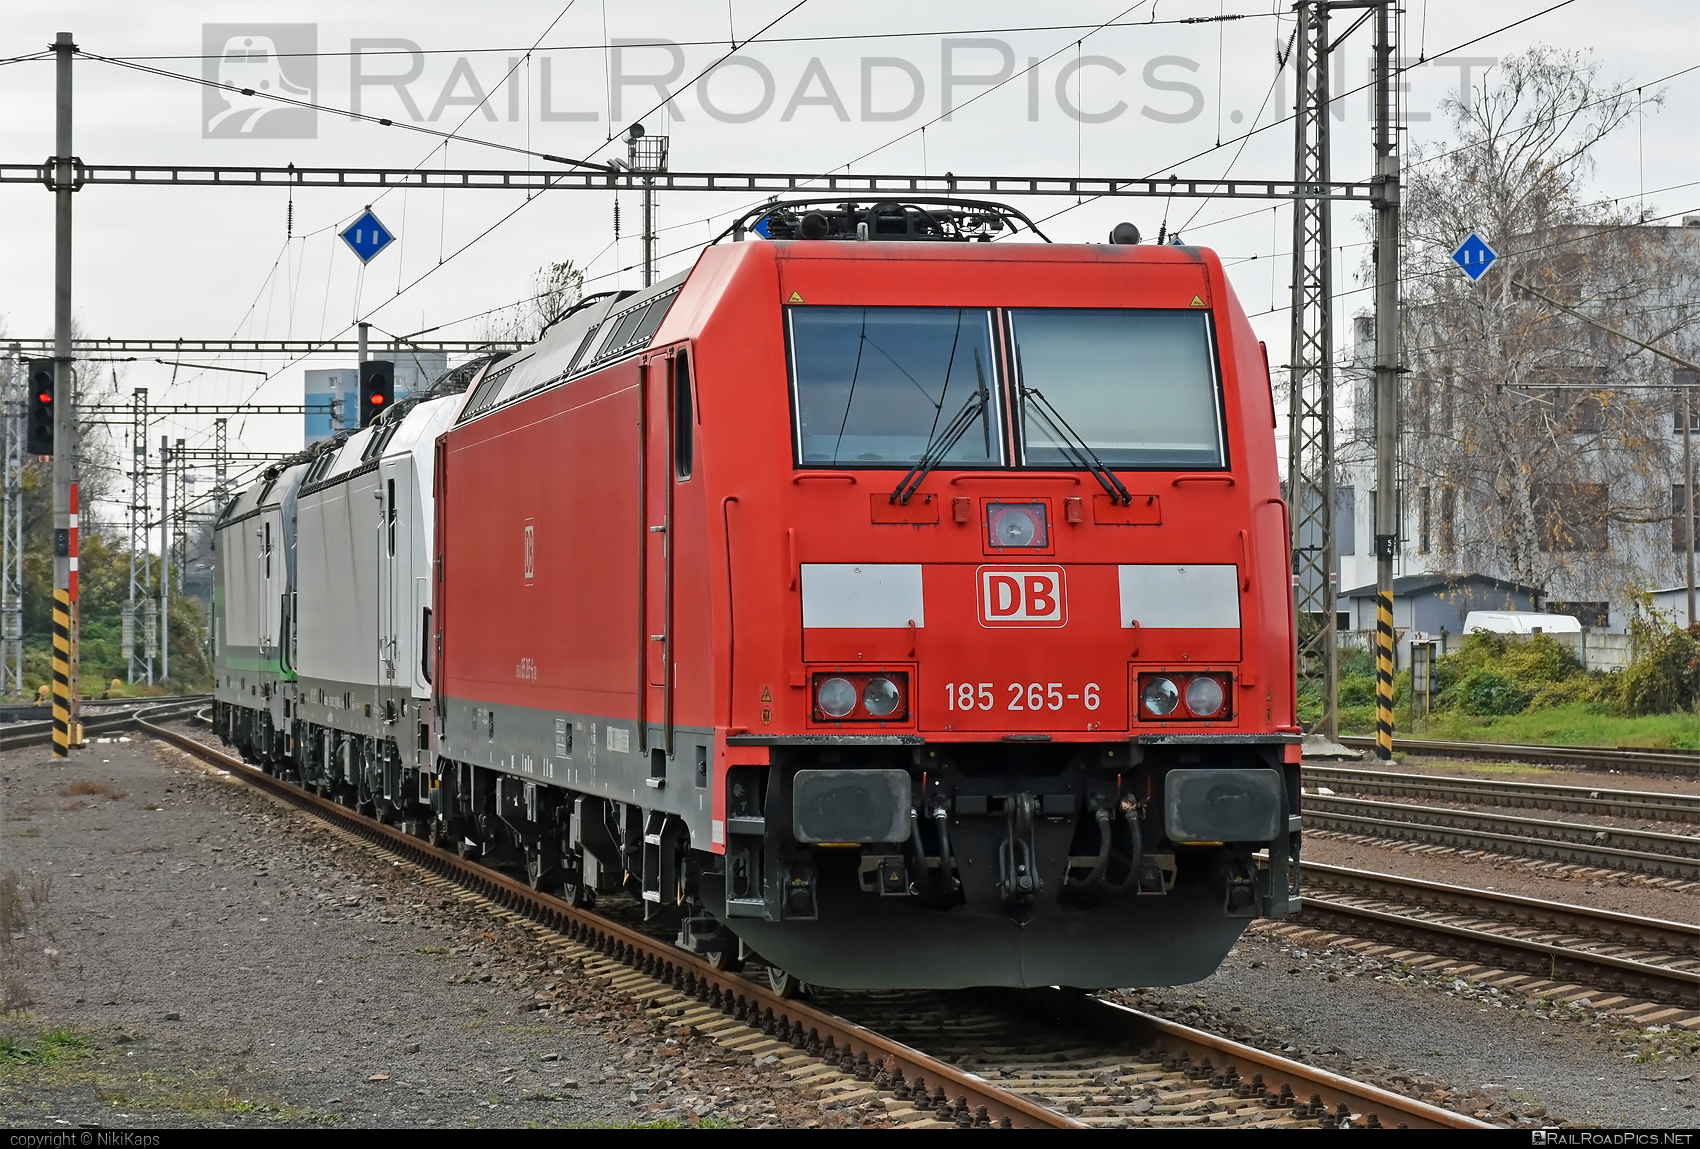 Bombardier TRAXX F140 AC2 - 185 265-6 operated by DB Cargo AG #bombardier #bombardiertraxx #db #dbcargo #dbcargoag #deutschebahn #traxx #traxxf140 #traxxf140ac #traxxf140ac2